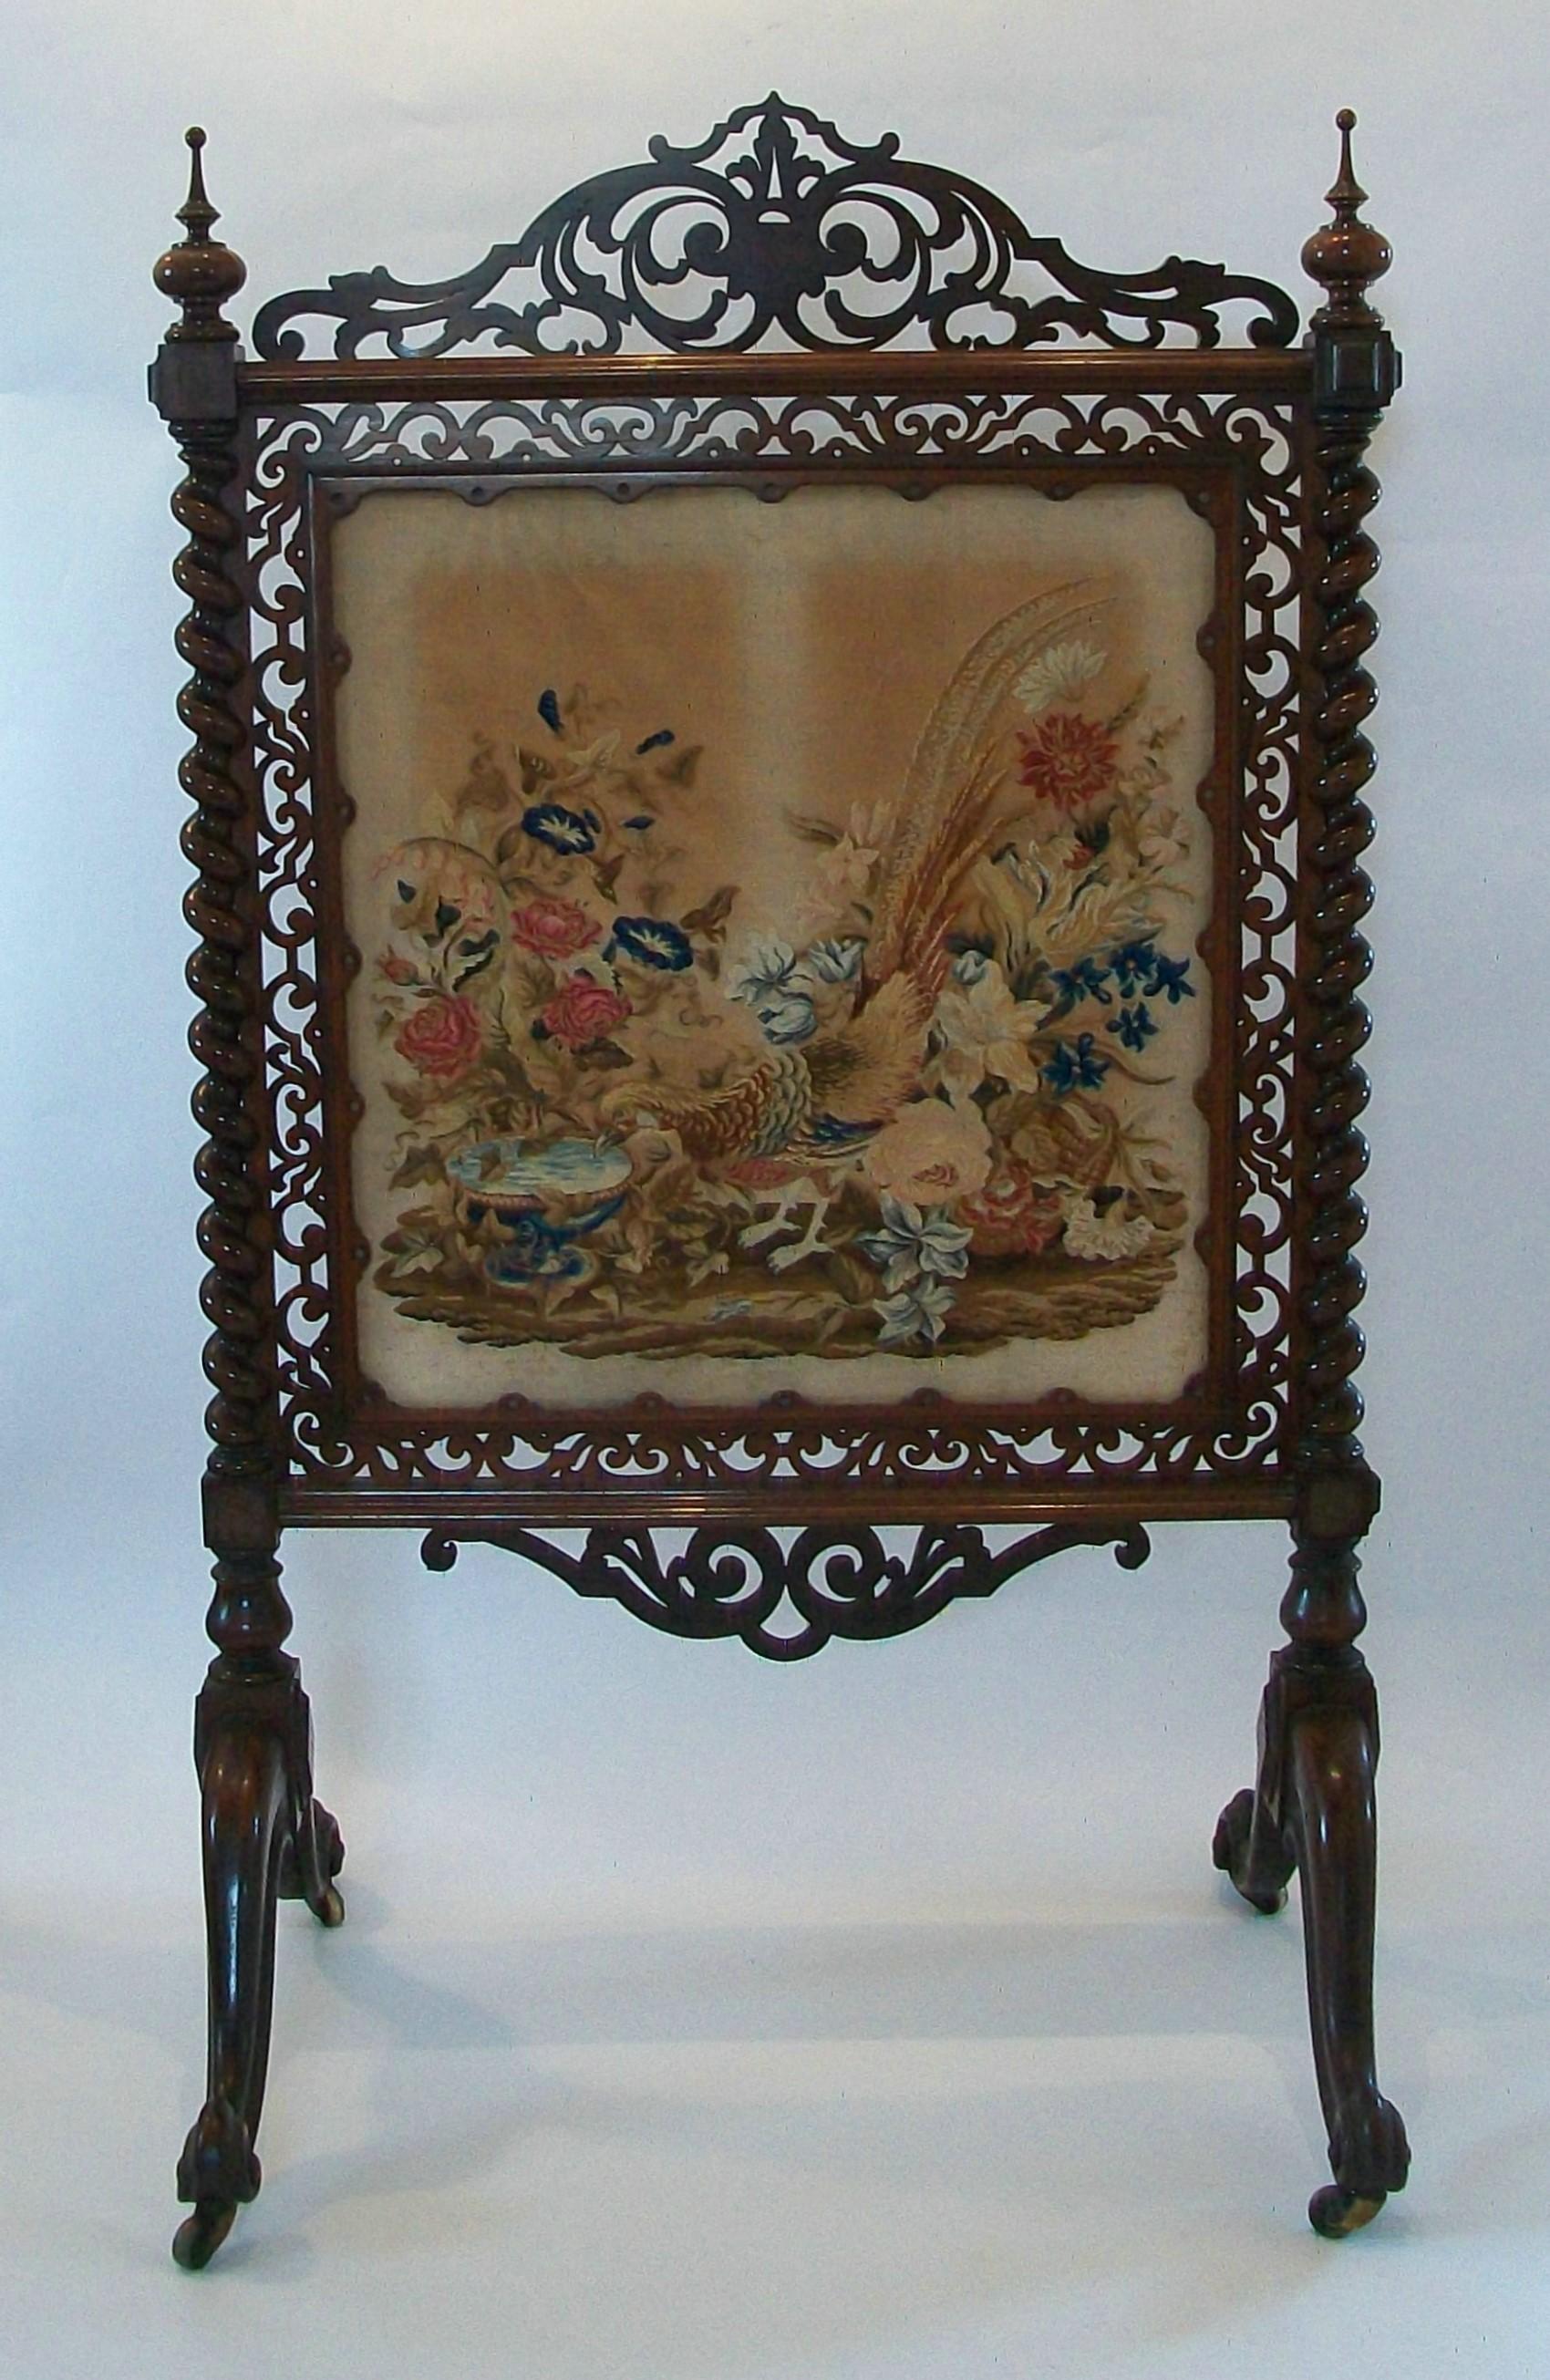 Fine William IV hardwood and tapestry fire screen - exceptional hand made quality with warm aged patina - featuring fantastic fretwork and barley twist supports with delicate turned finials surrounding the original needlepoint tapestry hand stitched